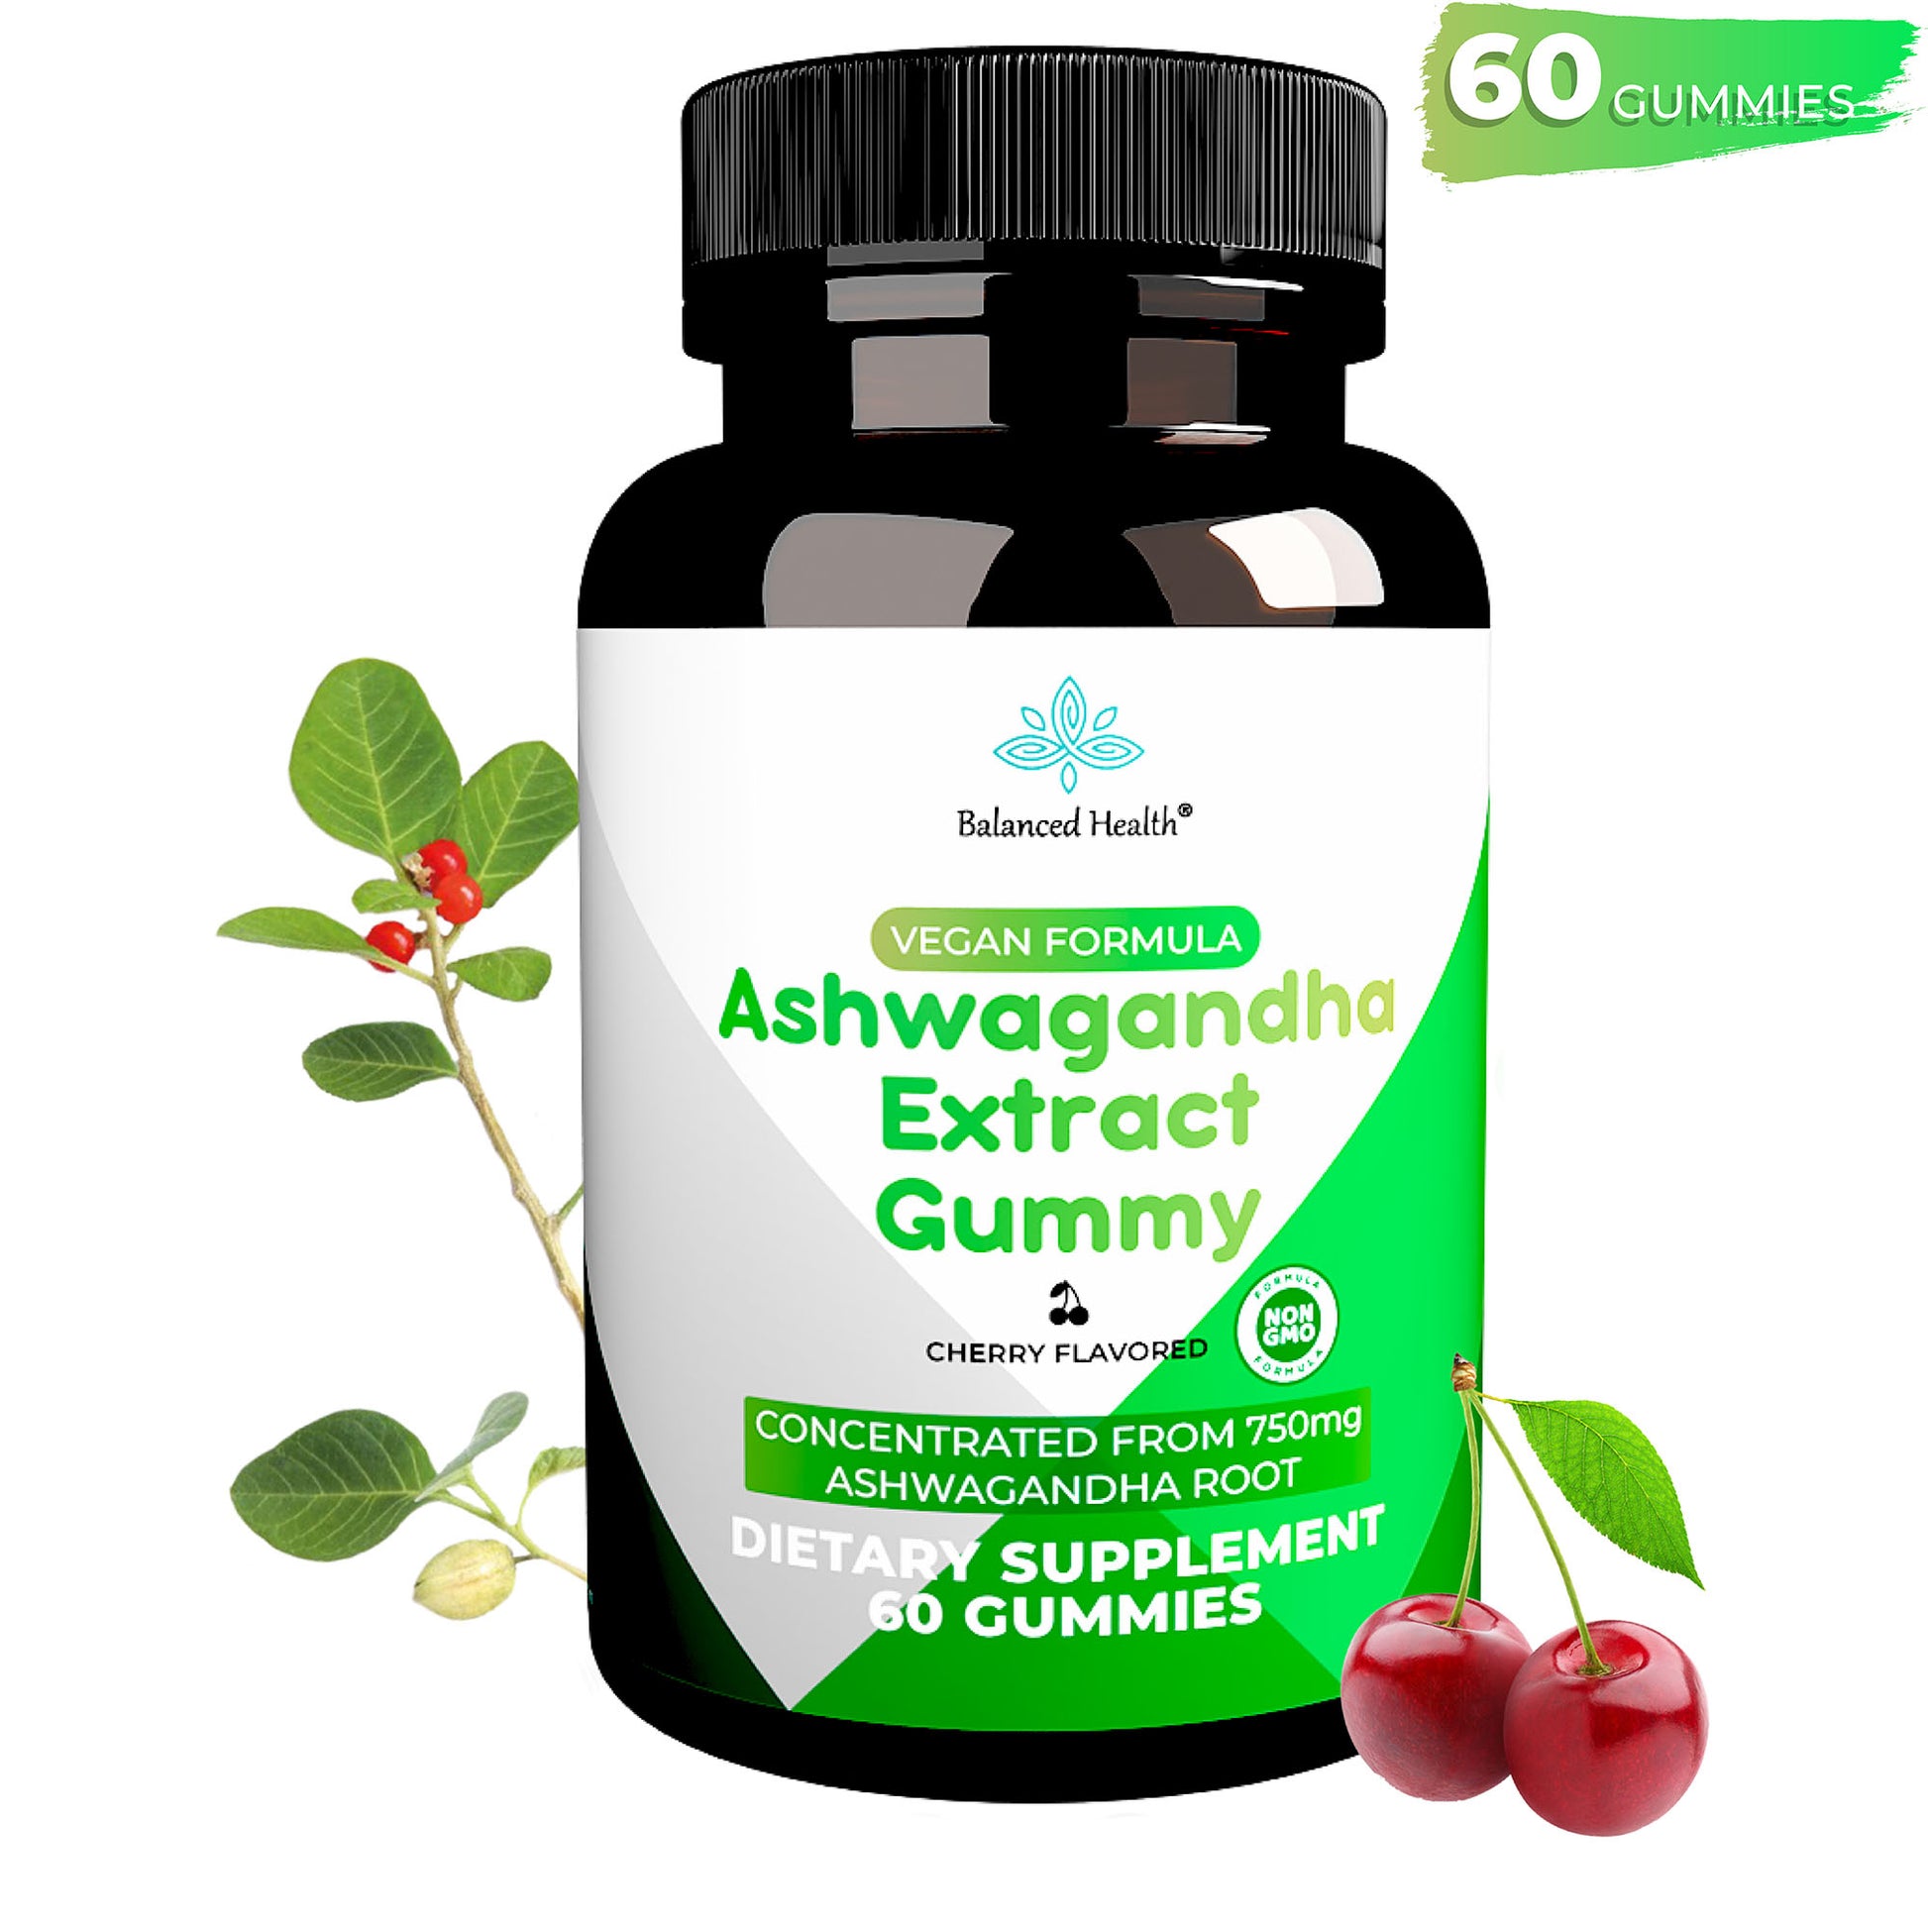 Pure Ashwagandha extract in a delicious cherry gummy.  25 mg of Ashwagandha 30:1 root extract to promote stress management and relaxation.